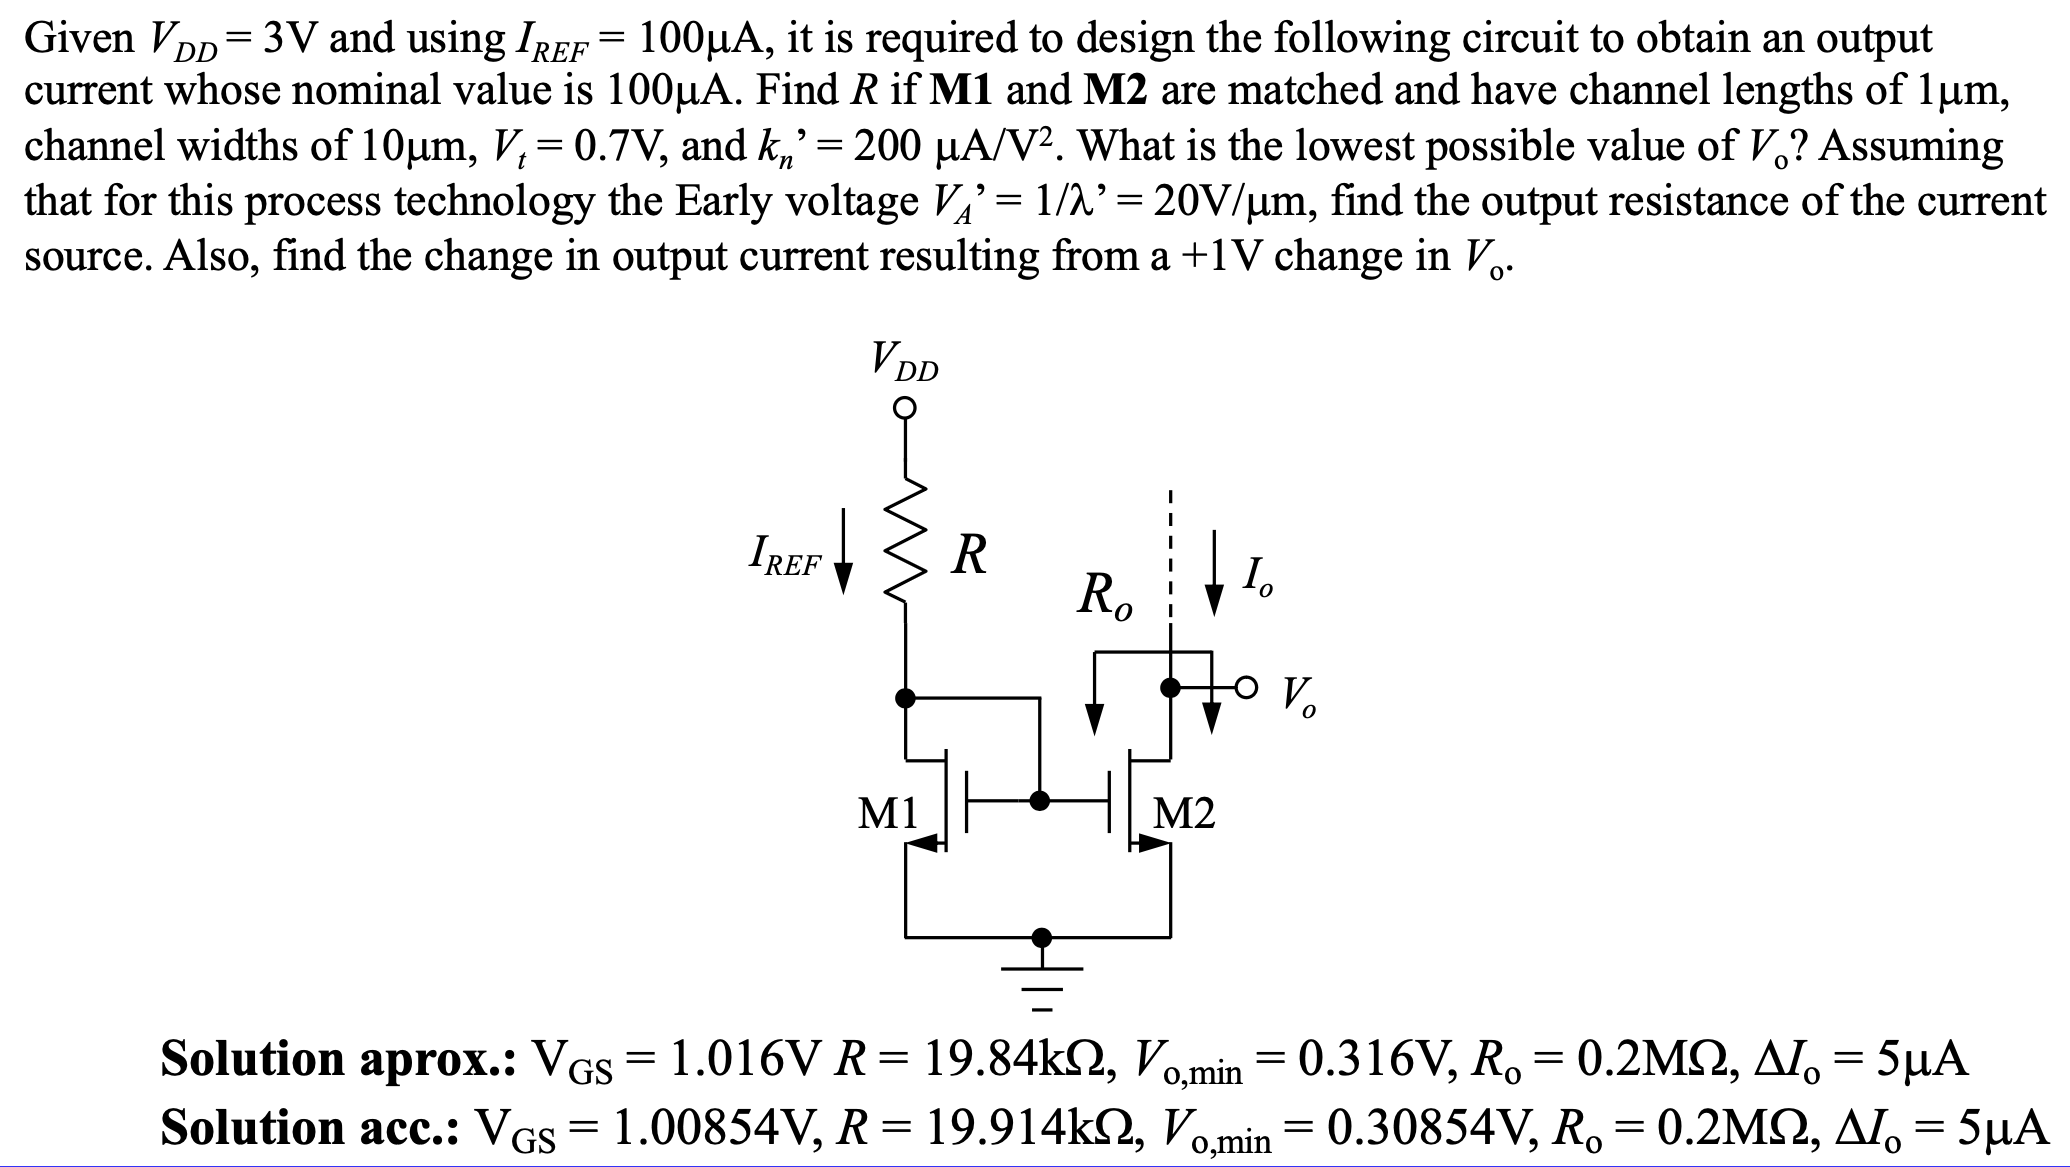 Given VDD = 3 V and using IREF = 100 μA, it is required to design the following circuit to obtain an output current whose nominal value is 100 μA. Find R if M1 and M2 are matched and have channel lengths of 1 μm, channel widths of 10 μm, Vt = 0.7 V, and kn′ = 200 μA/V2. What is the lowest possible value of Vo ? Assuming that for this process technology the Early voltage VA′ = 1 /λ′ = 20 V/μm, find the output resistance of the current source. Also, find the change in output current resulting from a +1 V change in V0. Solution aprox. : VGS = 1.016 VR = 19.84 kΩ, Vo, min = 0.316 V, Ro = 0.2 MΩ, ΔIo = 5 μA Solution acc. : VGS = 1.00854 V, R = 19.914 kΩ, Vo, min = 0.30854 V, Ro = 0.2 MΩ, ΔIo = 5 μA